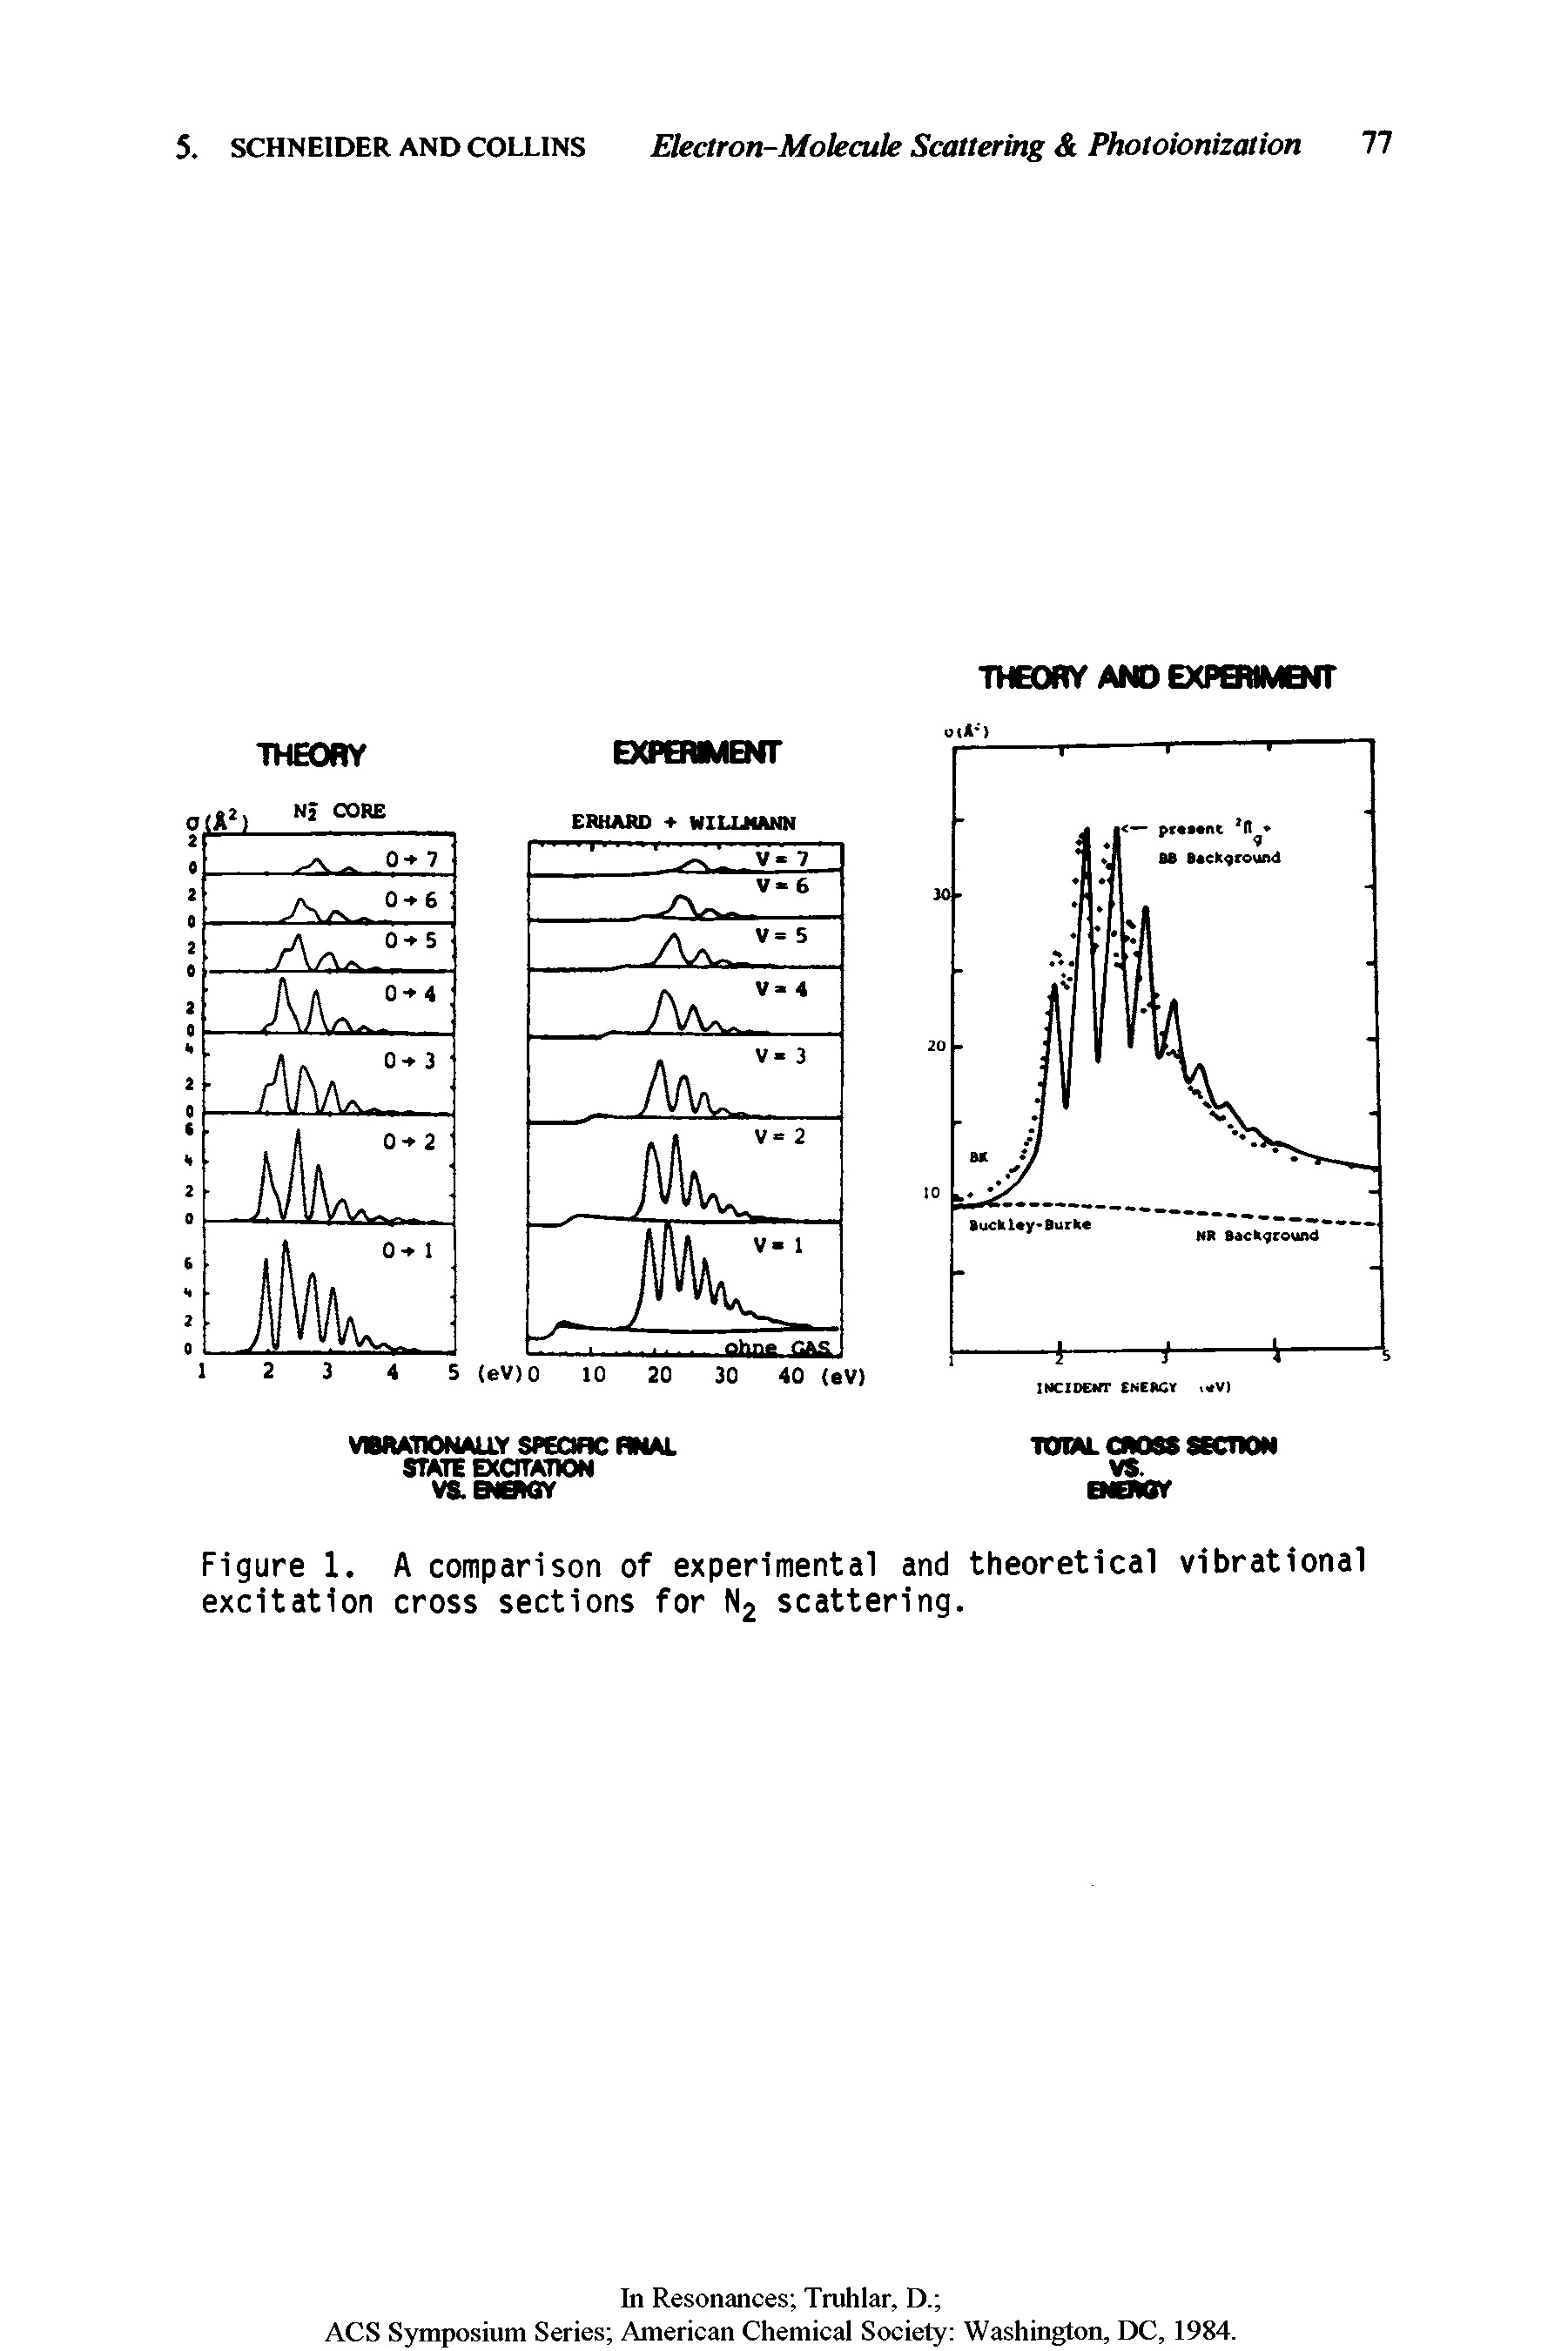 Figure 1. A comparison of experimental and theoretical vibrational excitation cross sections for N2 scattering.